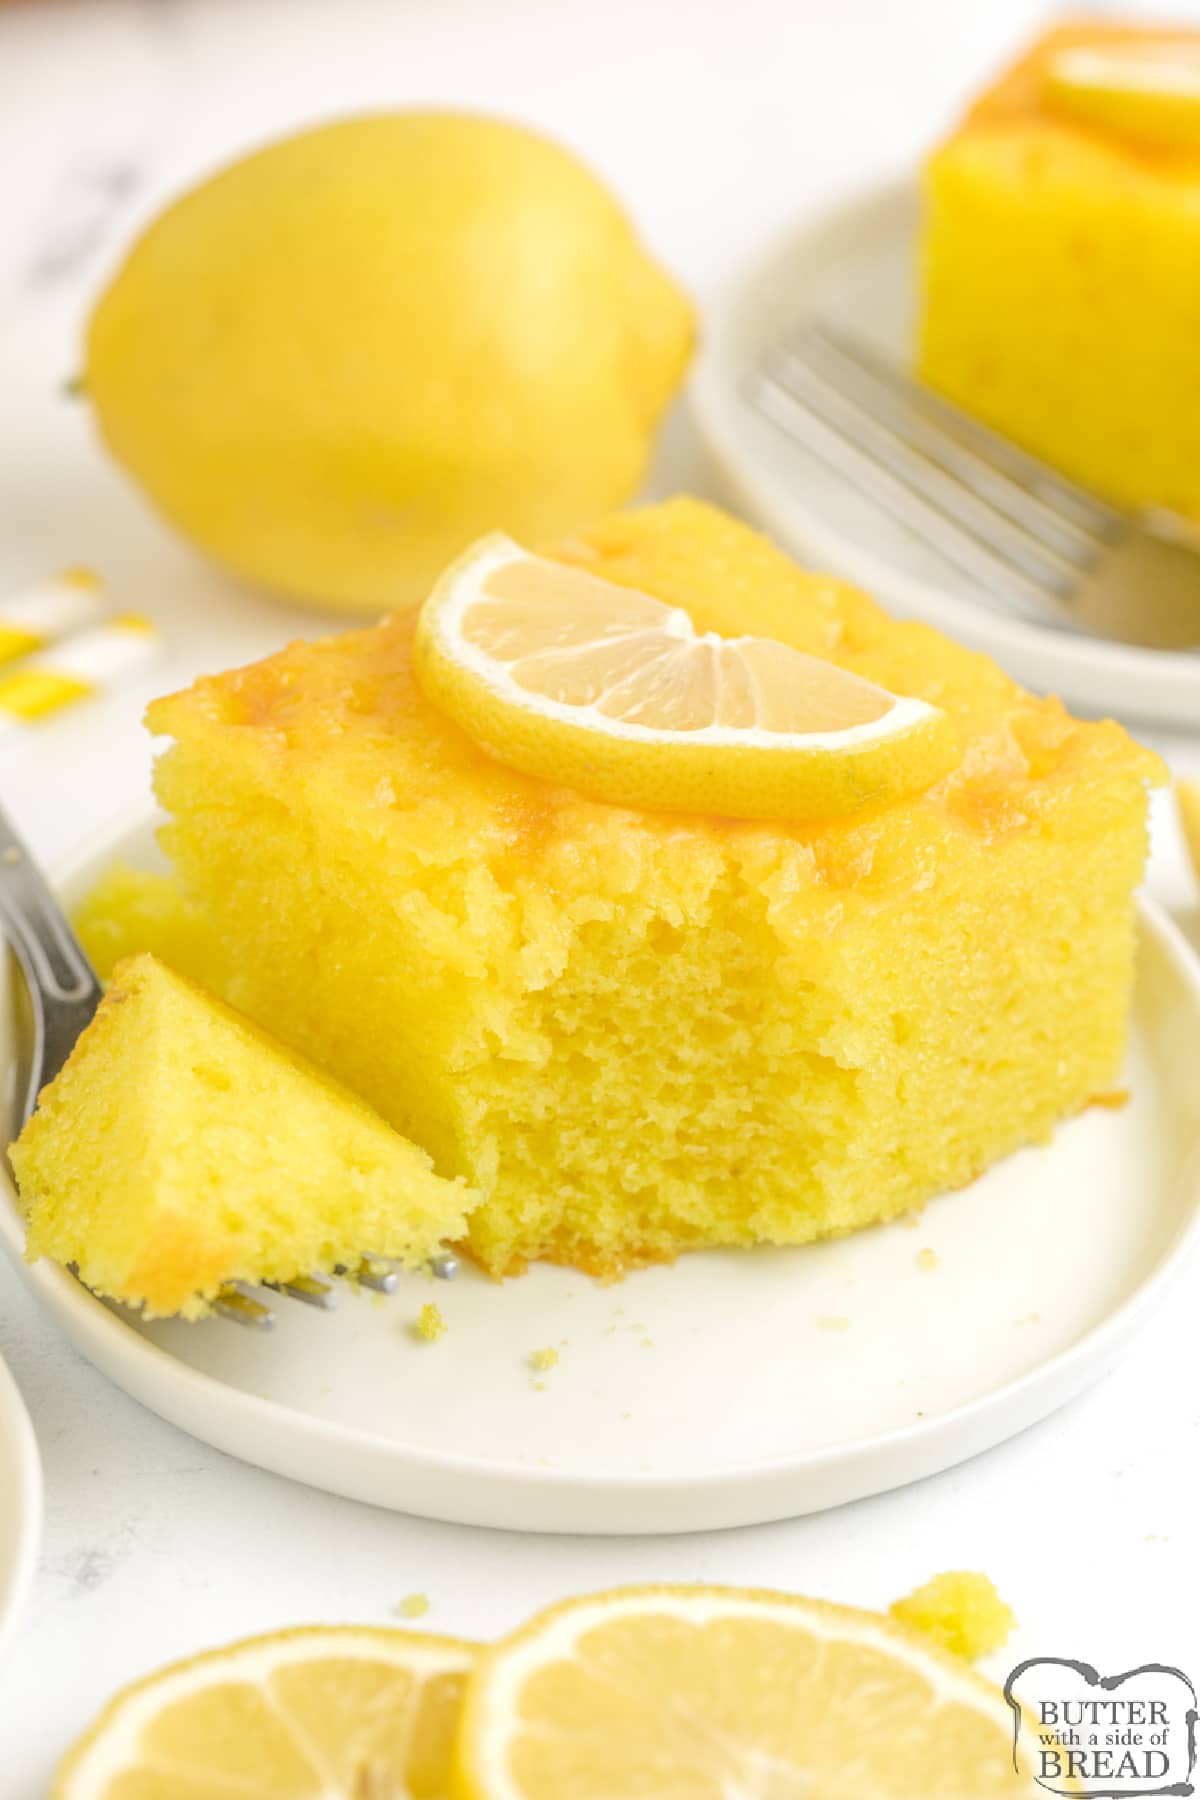 Lemon Jello Cake is easy to make and packed with tons of lemon flavor! This delicious cake is made with a lemon cake mix and lemon jello and topped with a simple lemon glaze.